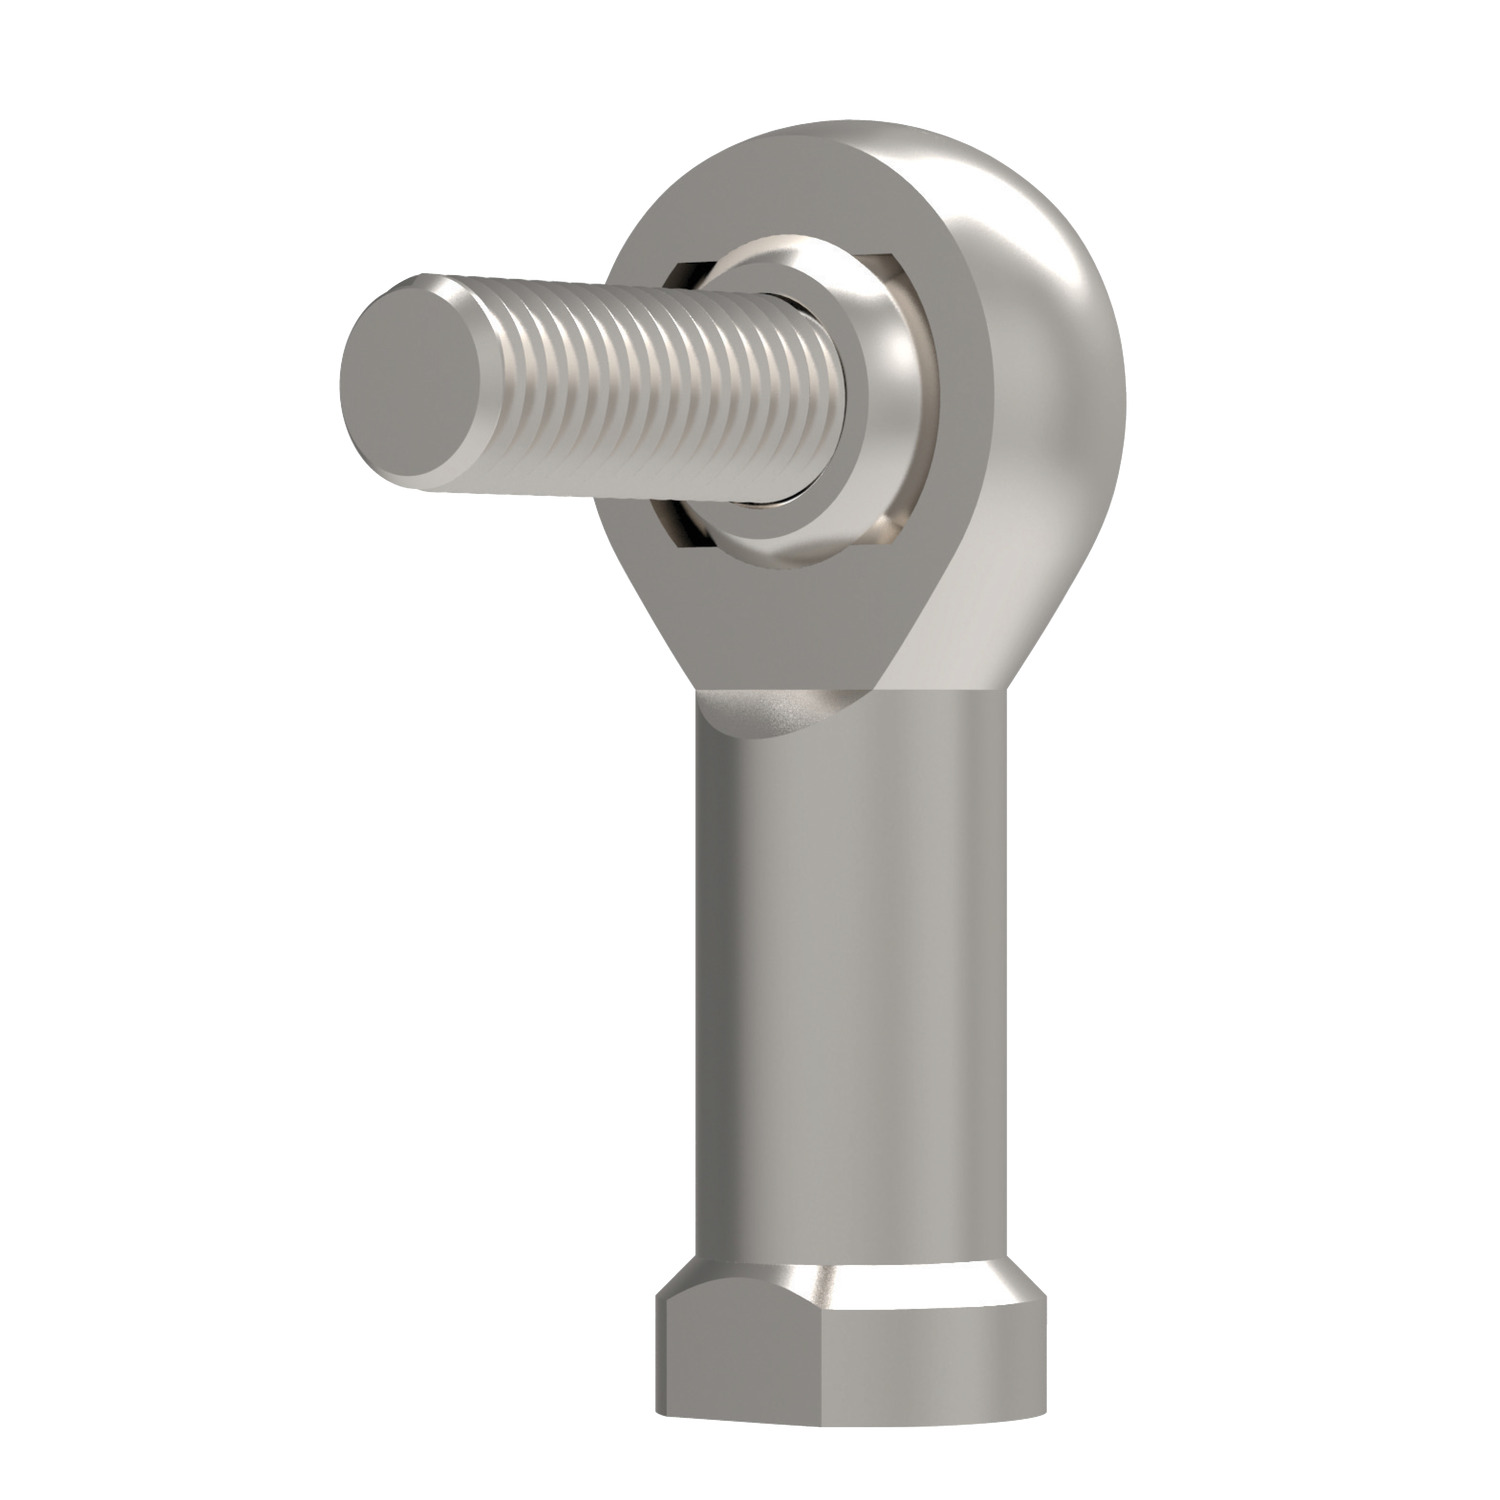 Stainless Rod End with Stud Fully stainless steel and maintenance free heavy duty female rod end with stud.